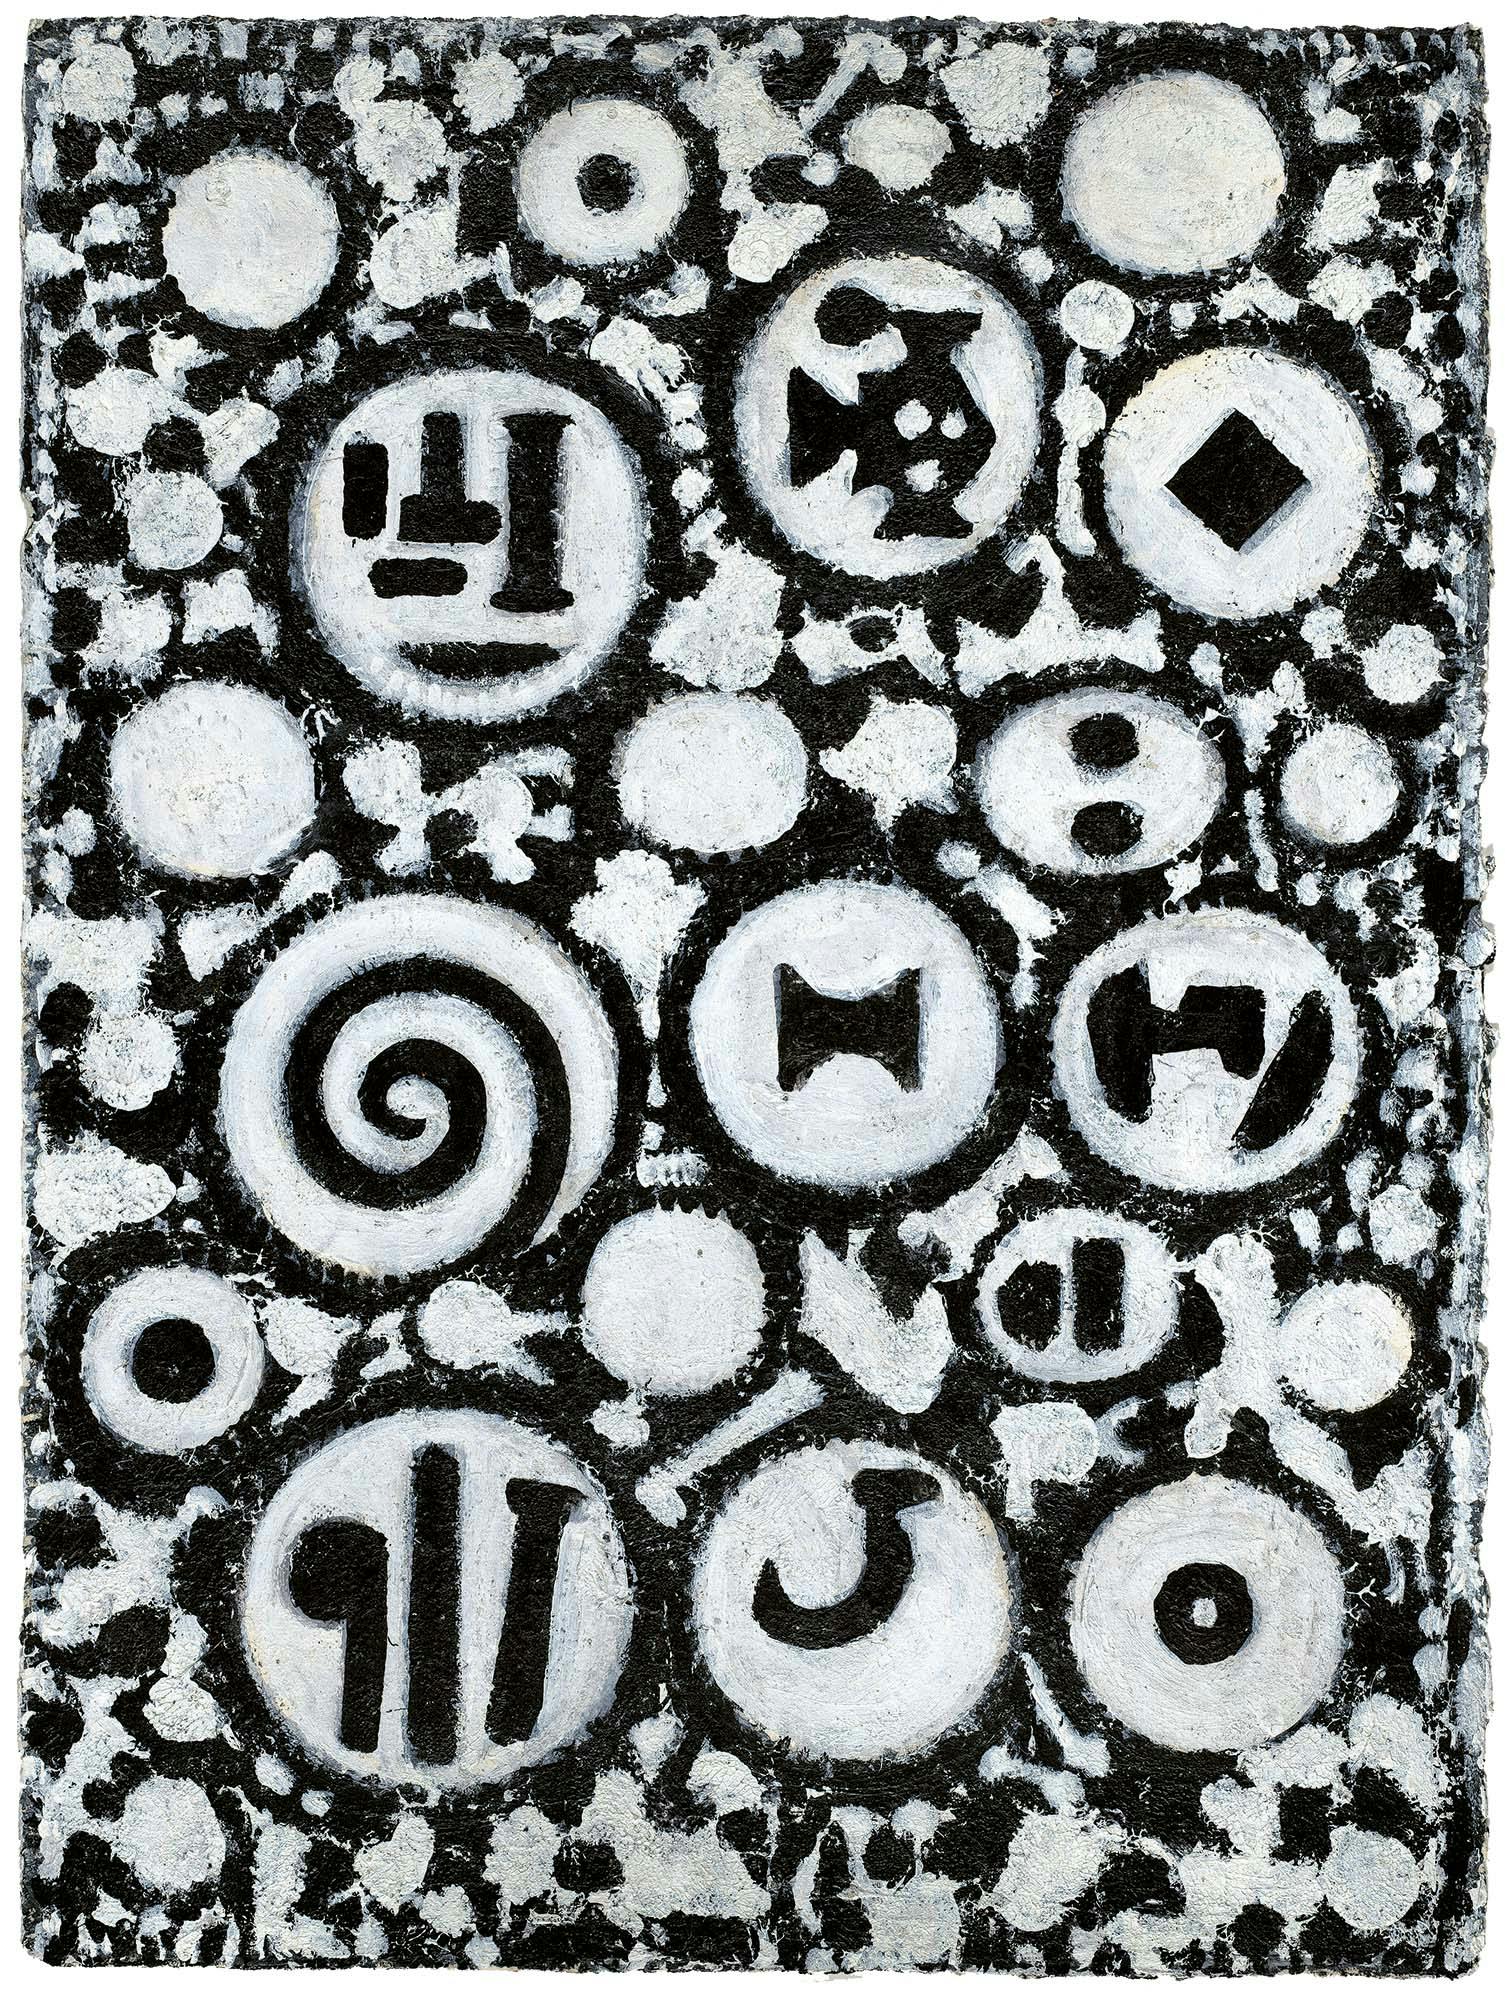 Circles, One Spiral
1978
Acrylic on paper
30 ¼ x 22 ¾ in. (76.8 x 57.8 cm)
 – The Richard Pousette-Dart Foundation